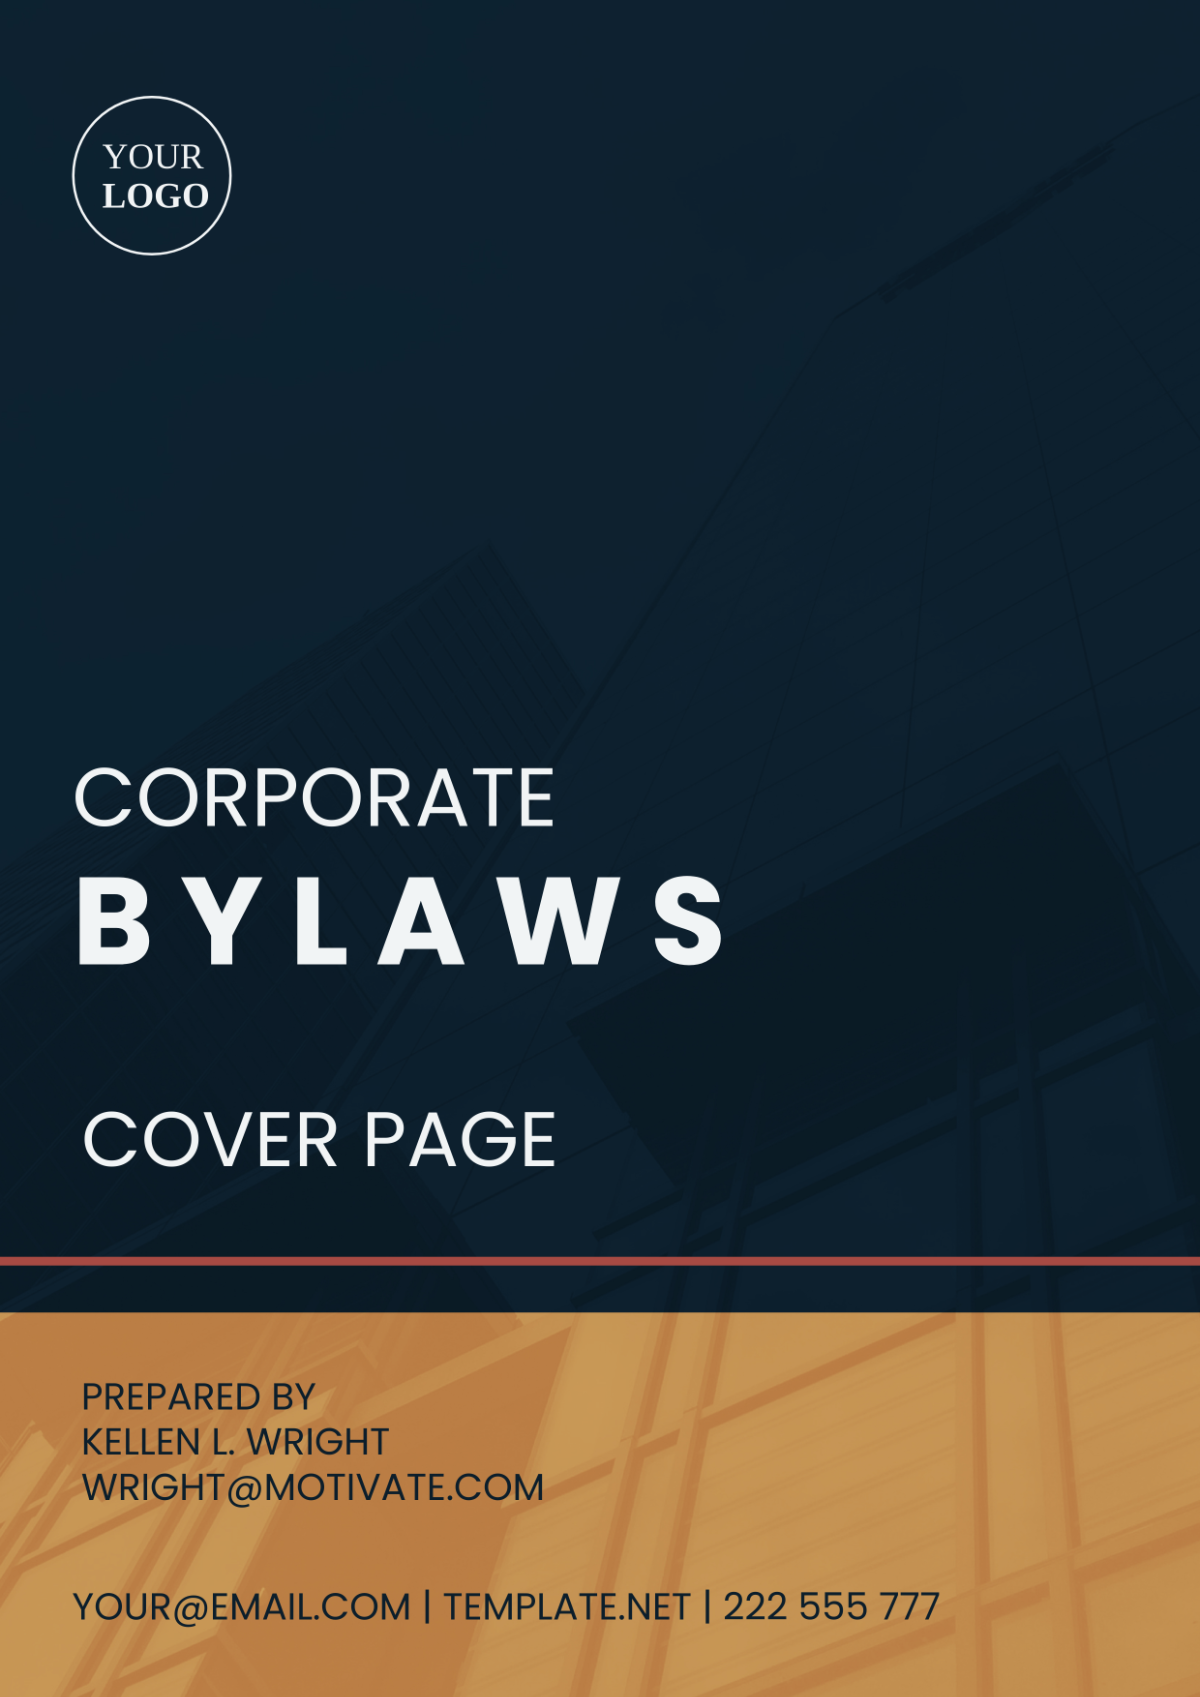 Corporate Bylaws Cover Page Template